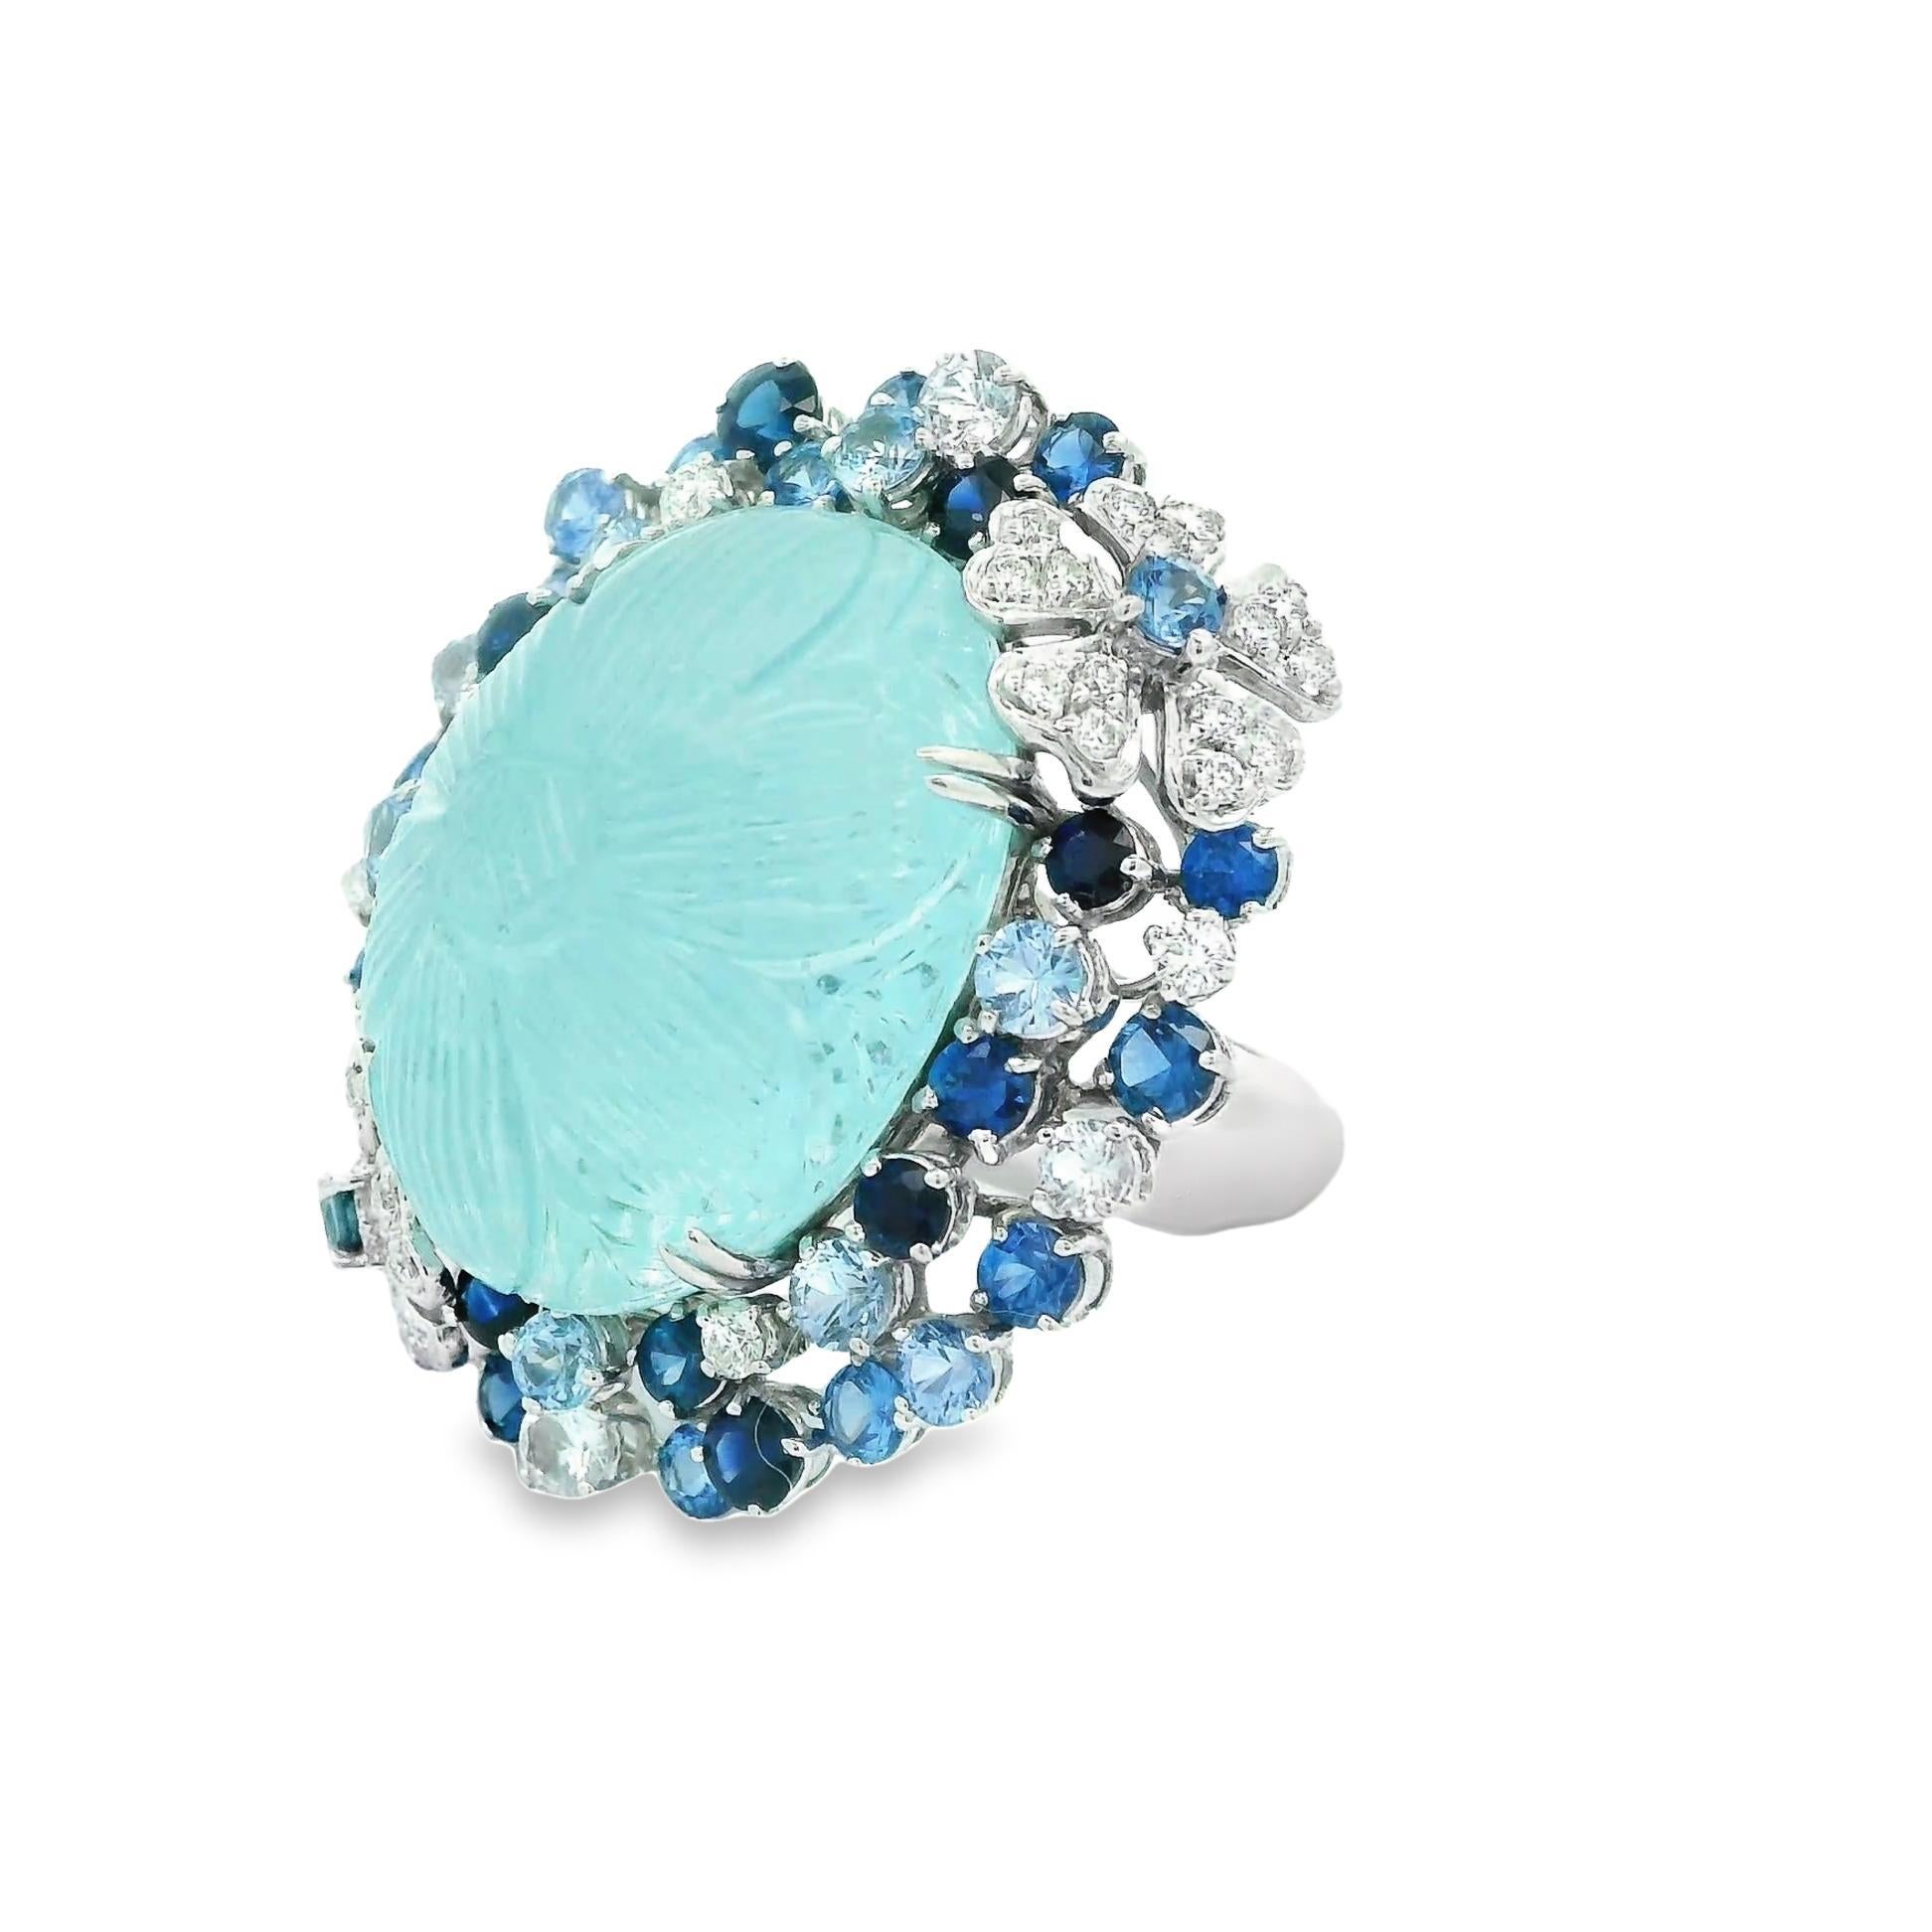 A beautiful and captivating cocktail ring, with an enchanting 25.33 carat hand-carved aquamarine. It has a bright sea-blue color and a lovely flower carving. Its smooth surface, carved with intricate petals, seems to dance with every glimmer of